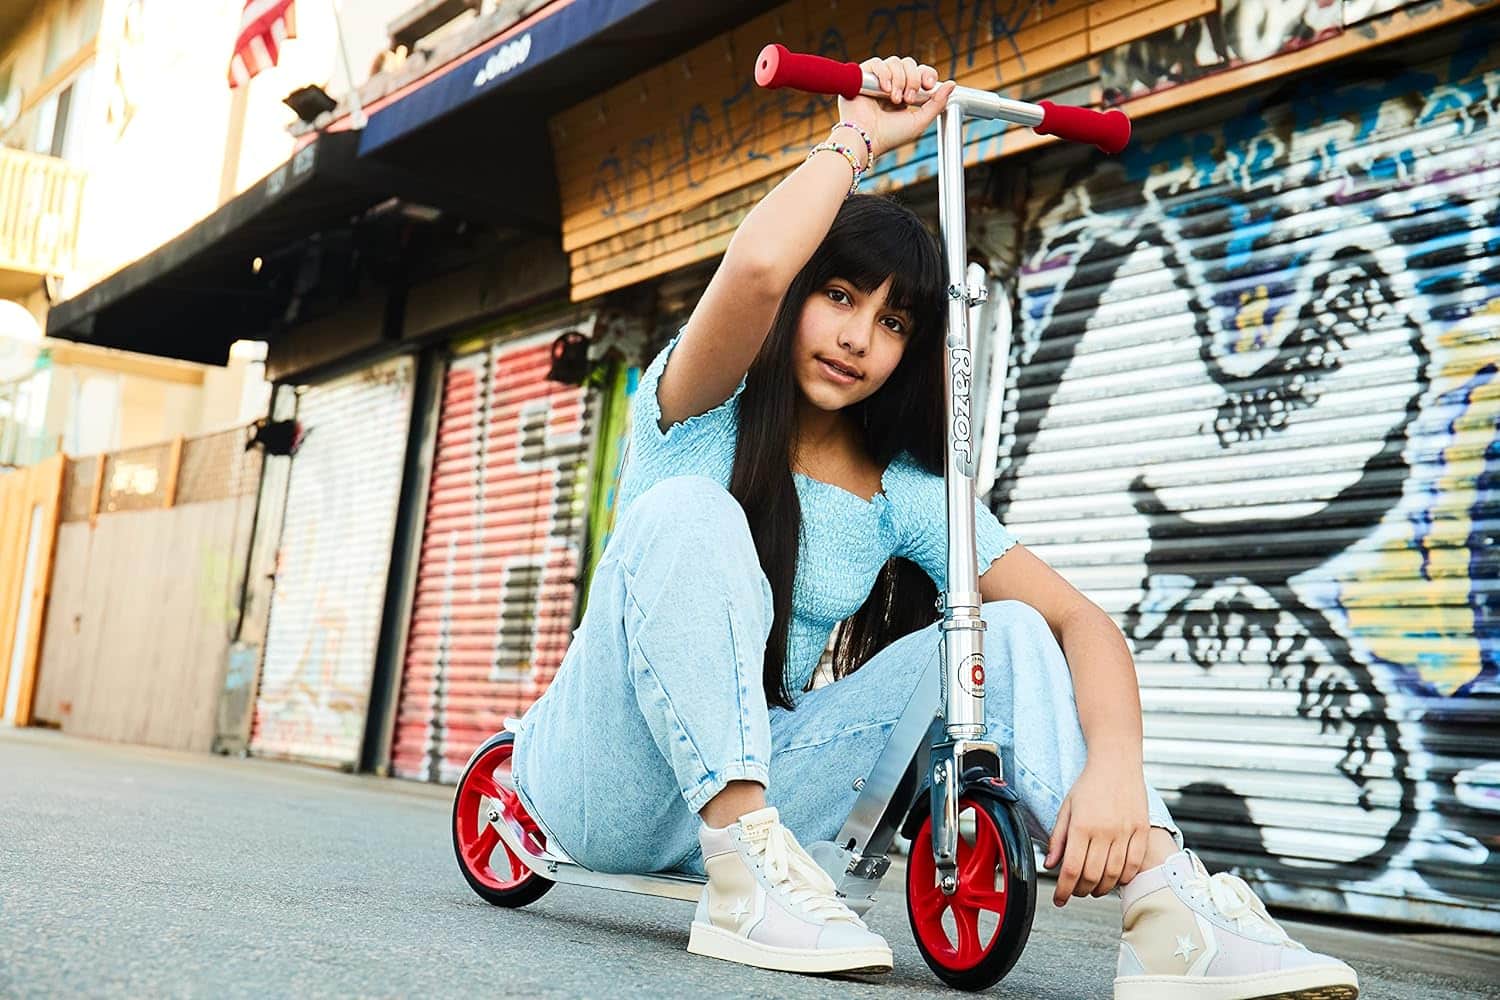 Razor A5 Lux Kick Scooter for Kids Ages 8+ - A Fun and Stylish Ride for Older Kids